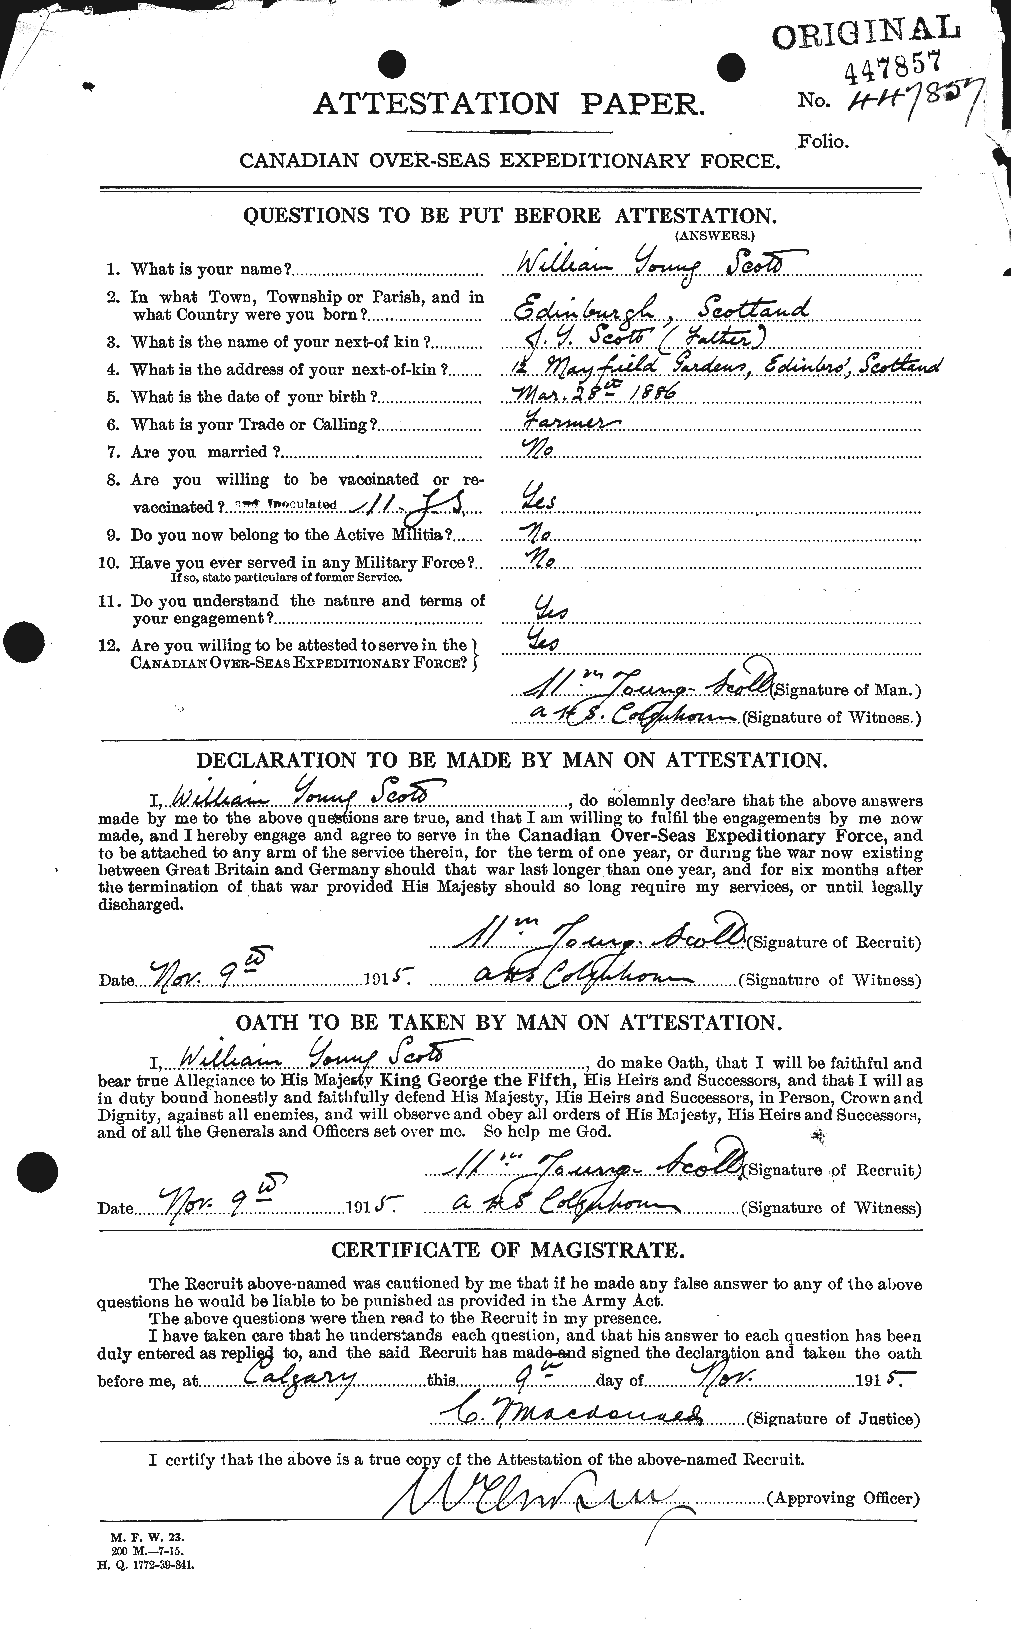 Personnel Records of the First World War - CEF 087249a